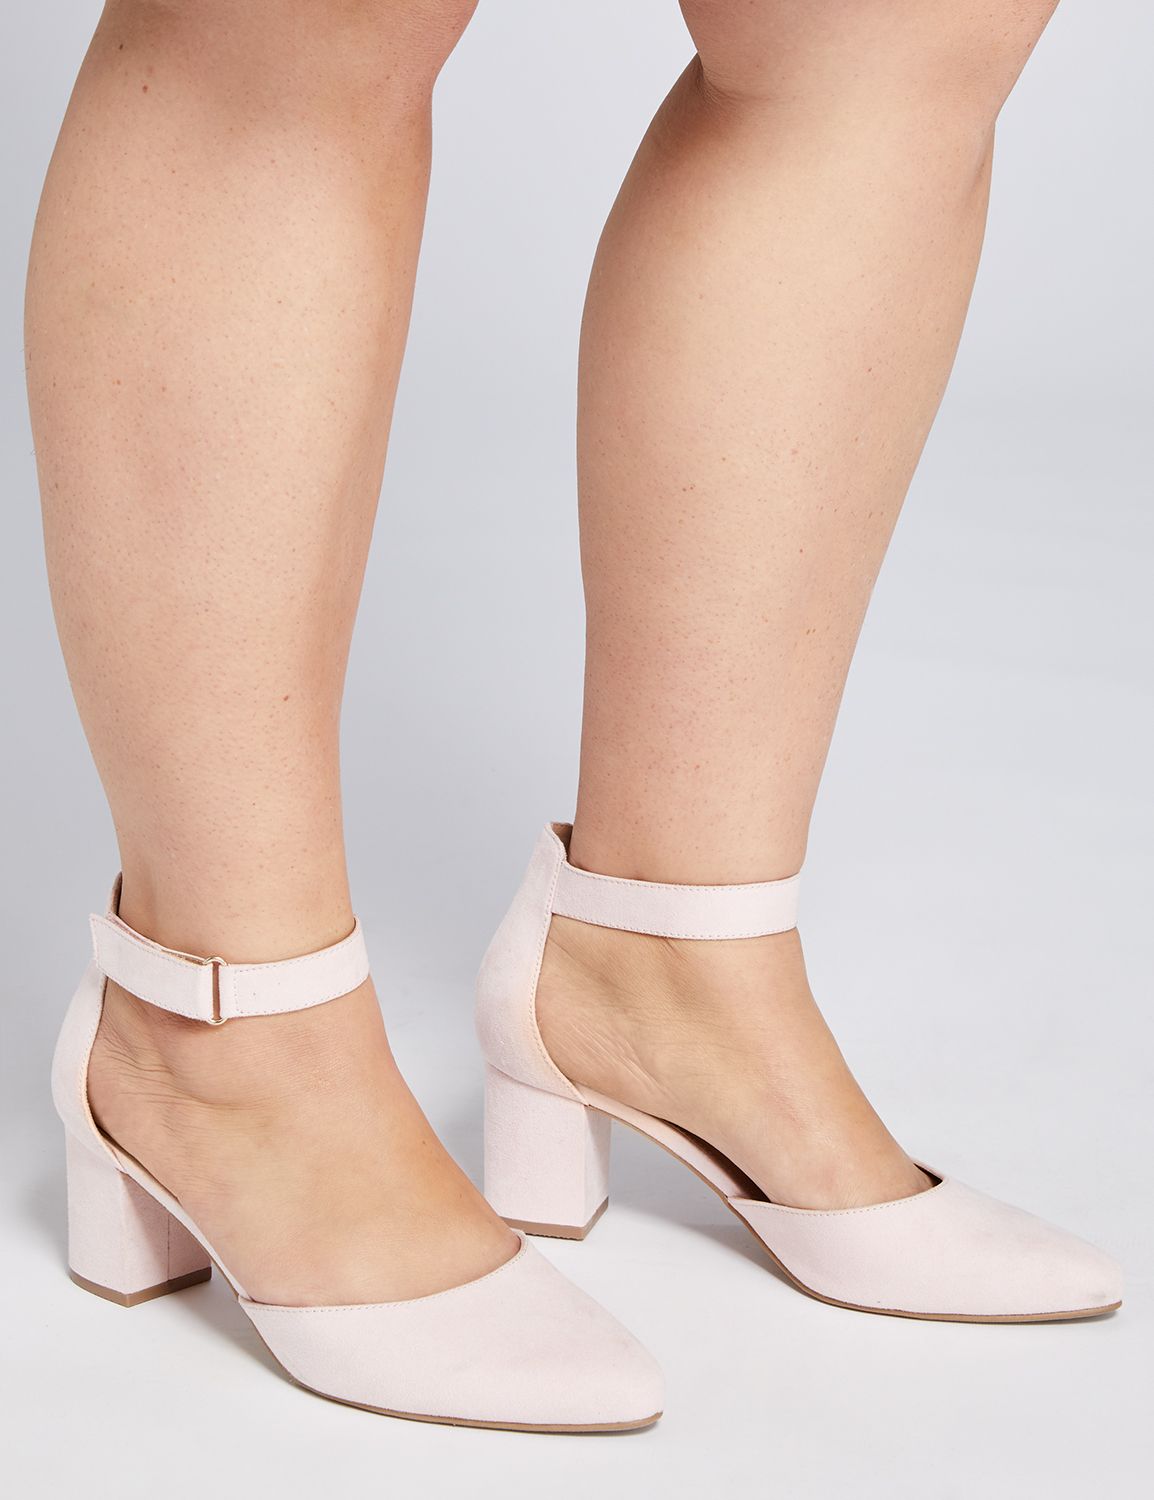 lane bryant wide width shoes